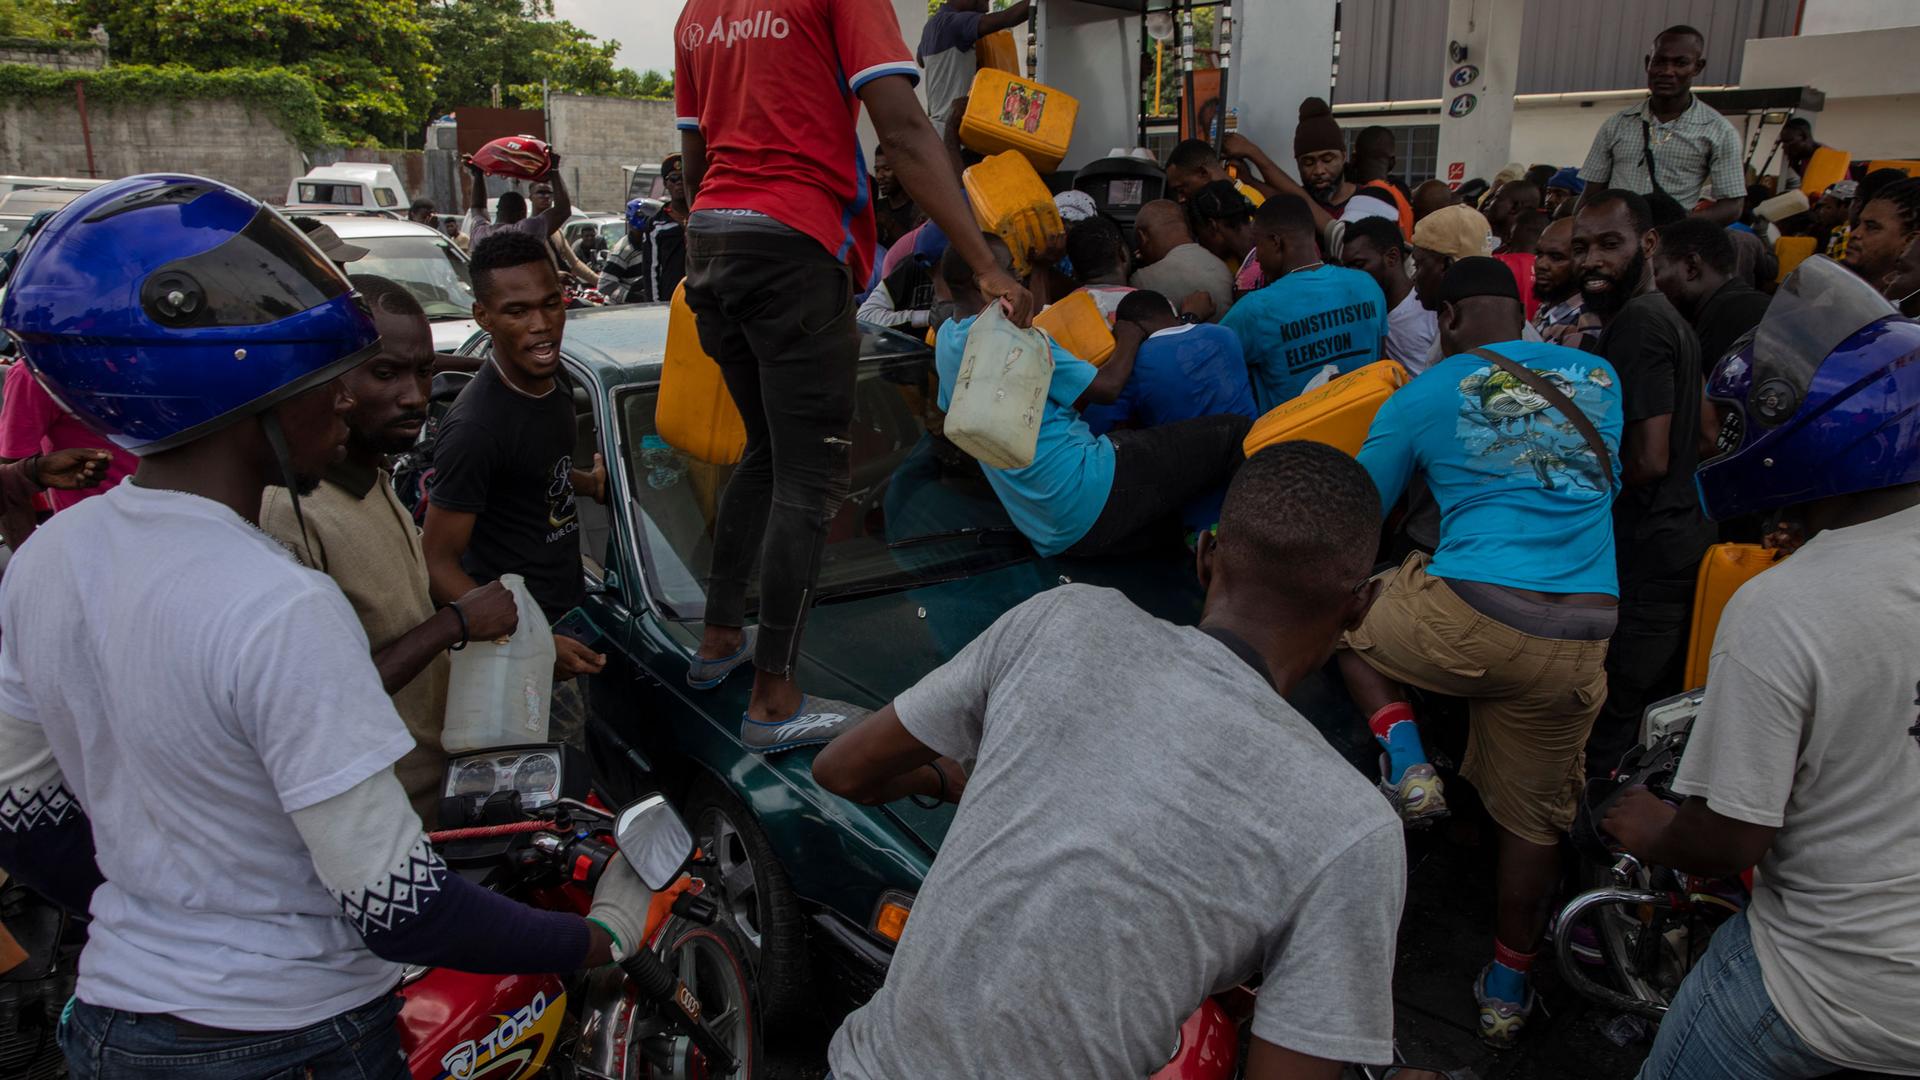 People push and shove as they try to get their tanks filled at a gas station in Port-au-Prince, Haiti, Wednesday, Sept. 22, 2021.